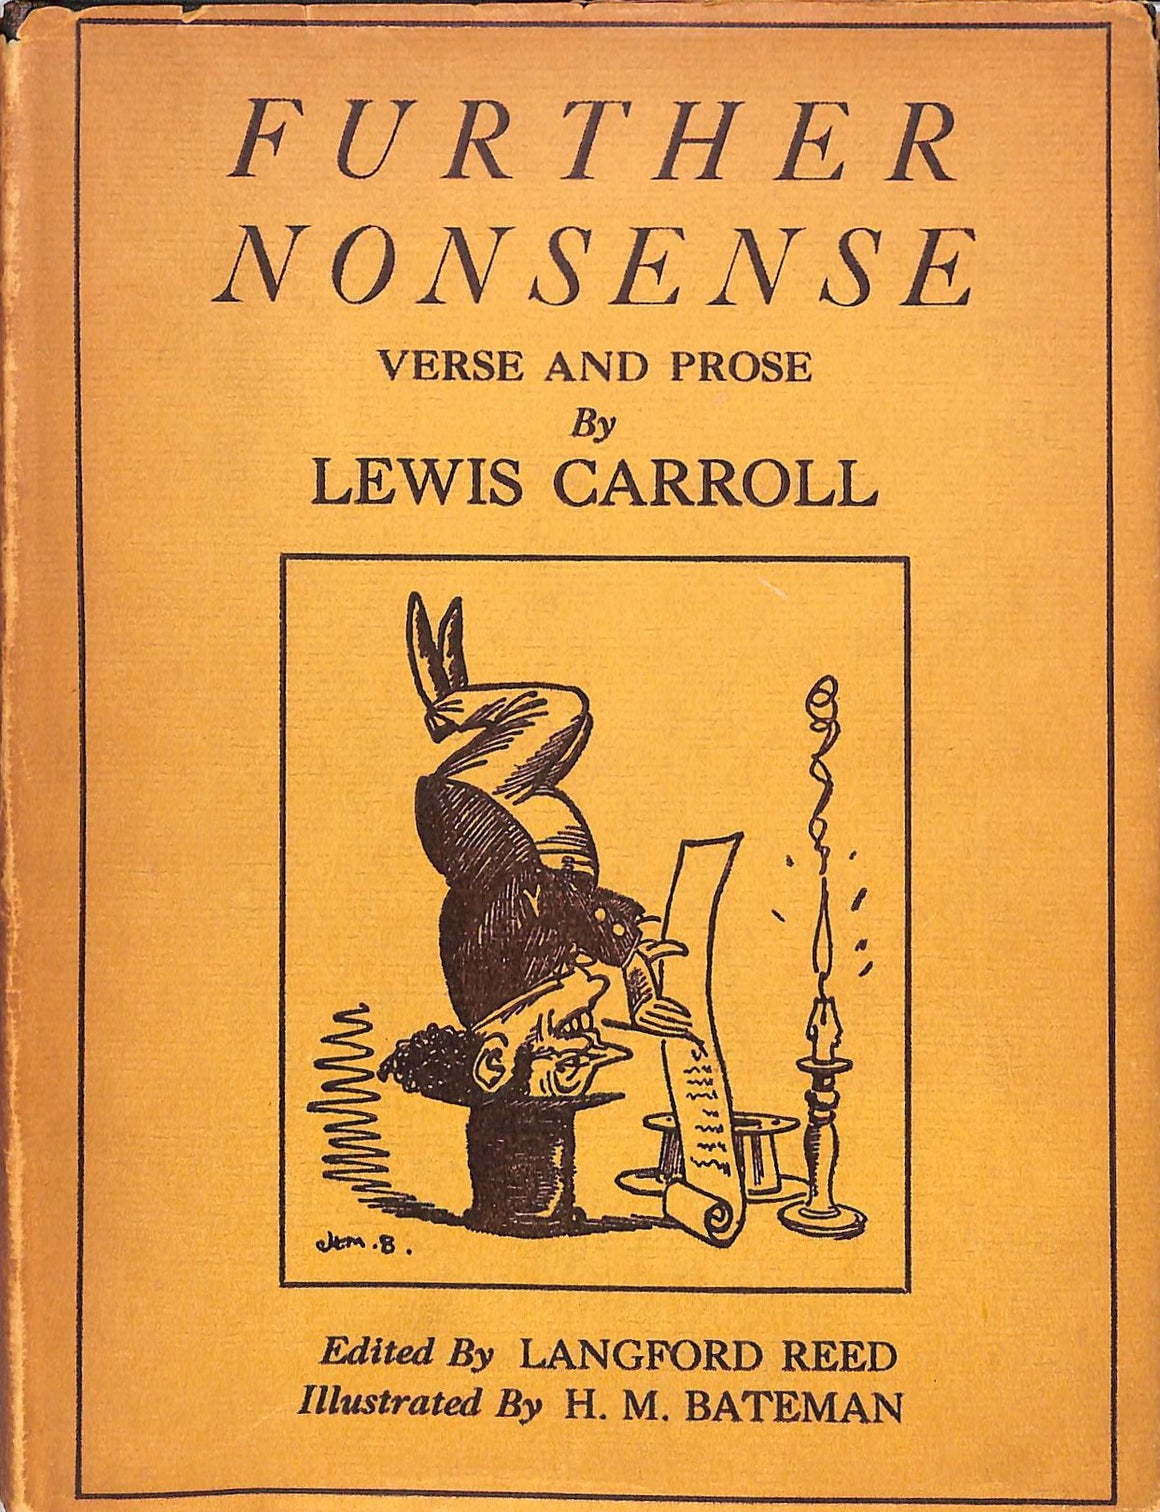 "Further Nonsense Verse And Prose" 1926 CARROLL, Lewis